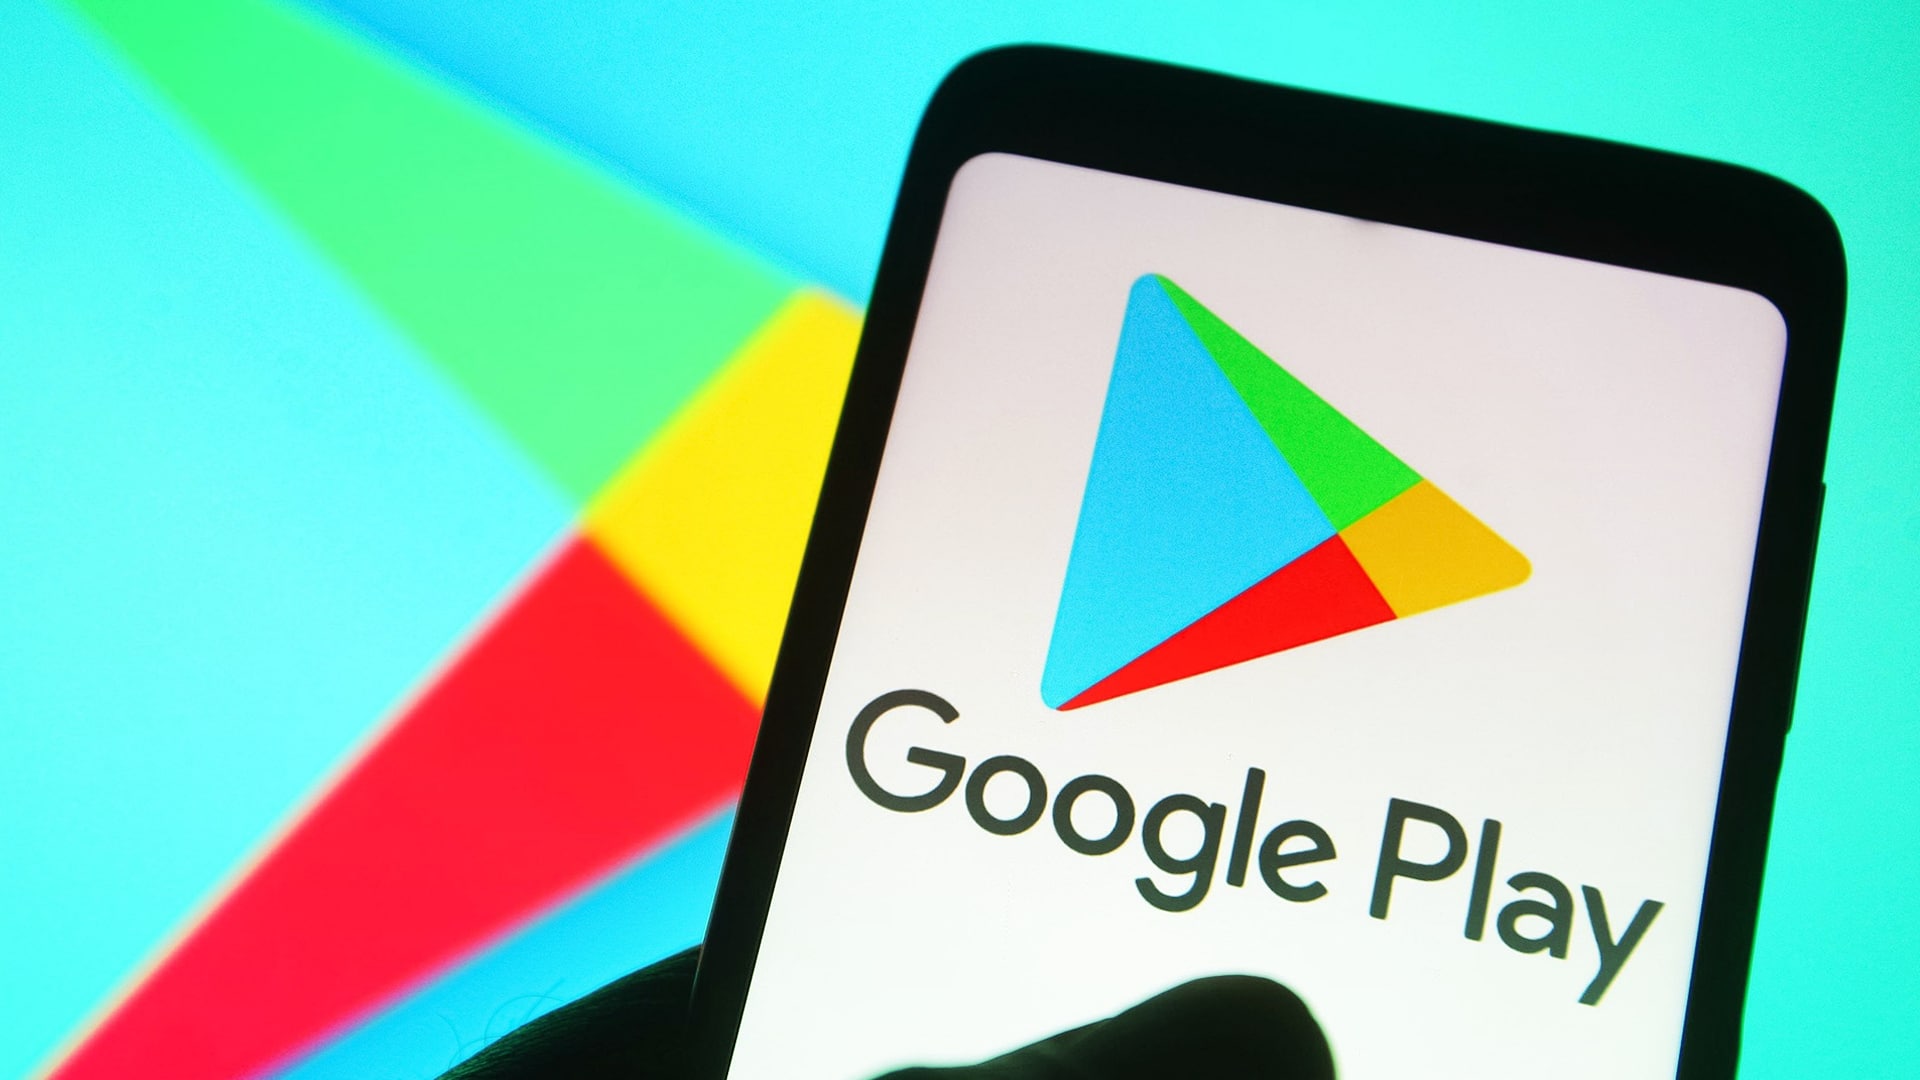 Play Store policies: CCI slaps Rs 936.44 cr fine on Google for abusing dominance